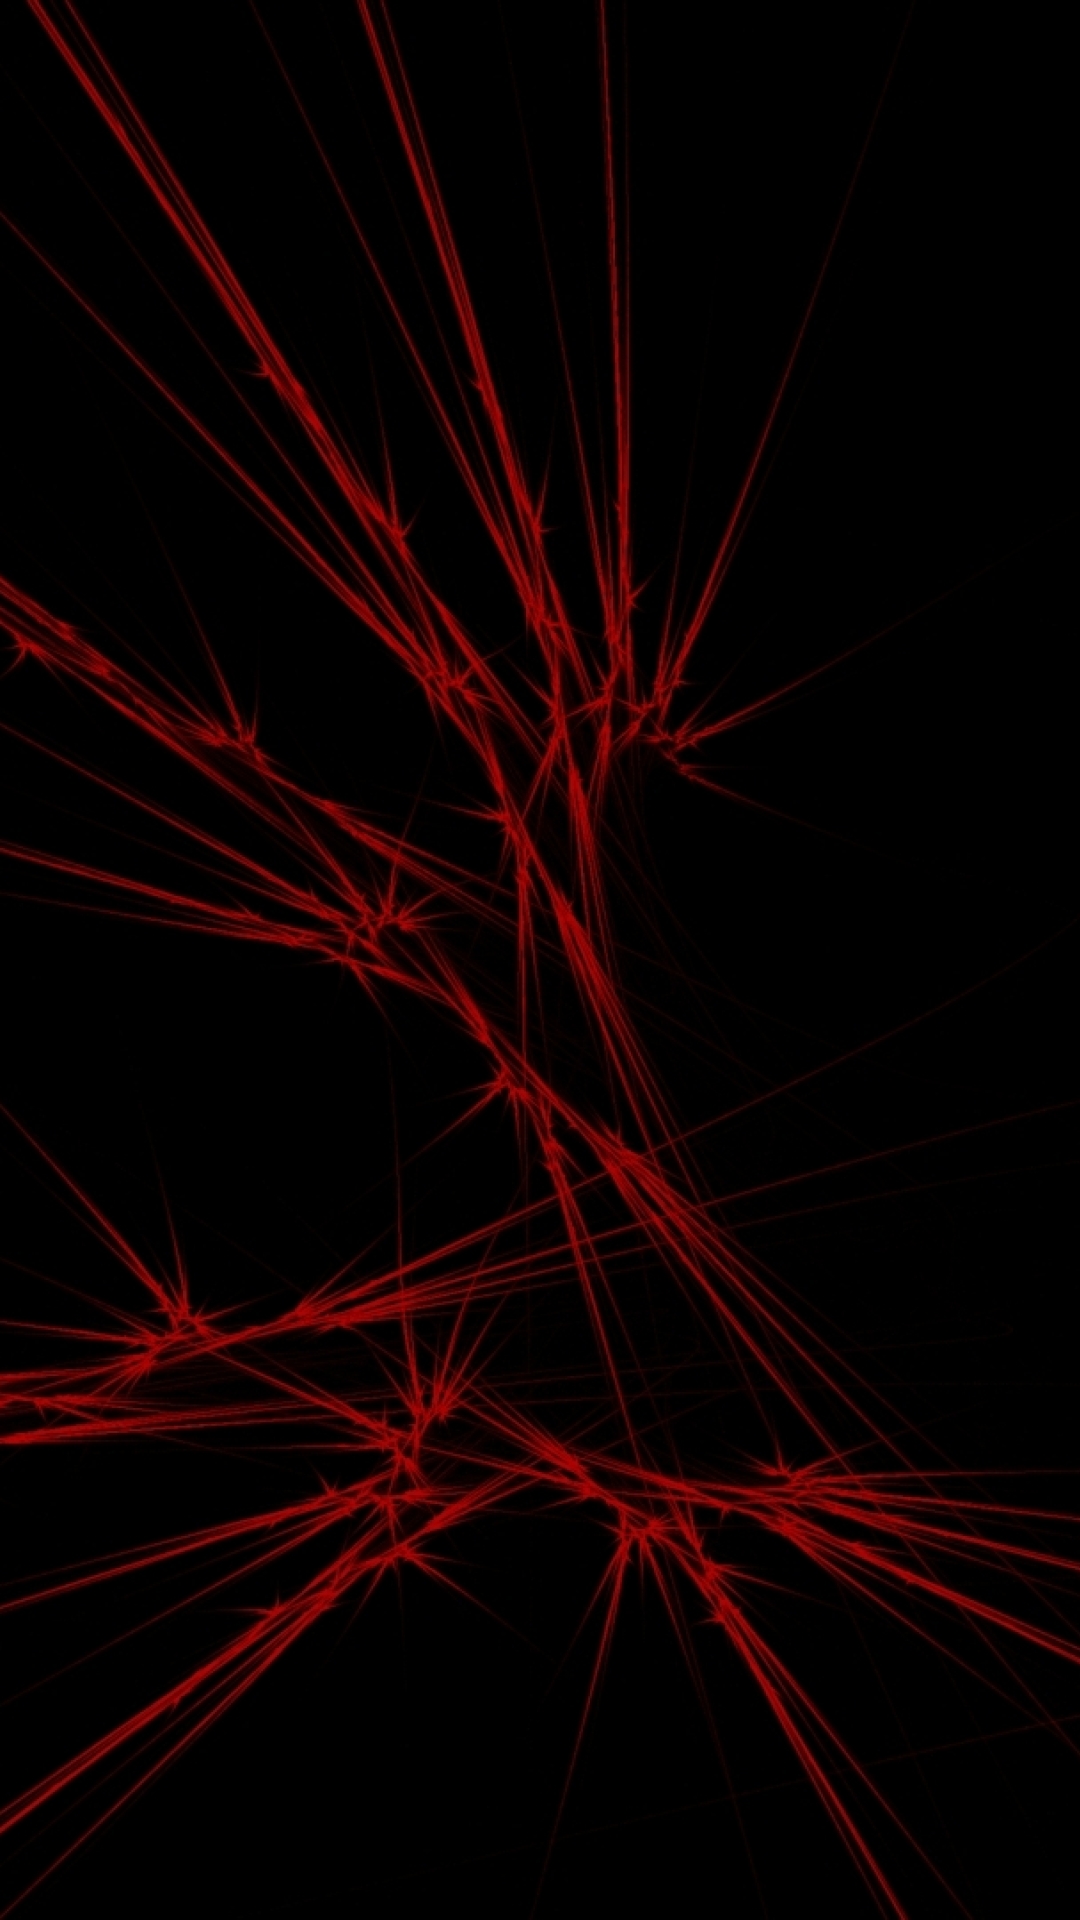 1080x1920 Resolution Red Black Abstract Iphone 7 6s 6 Plus And